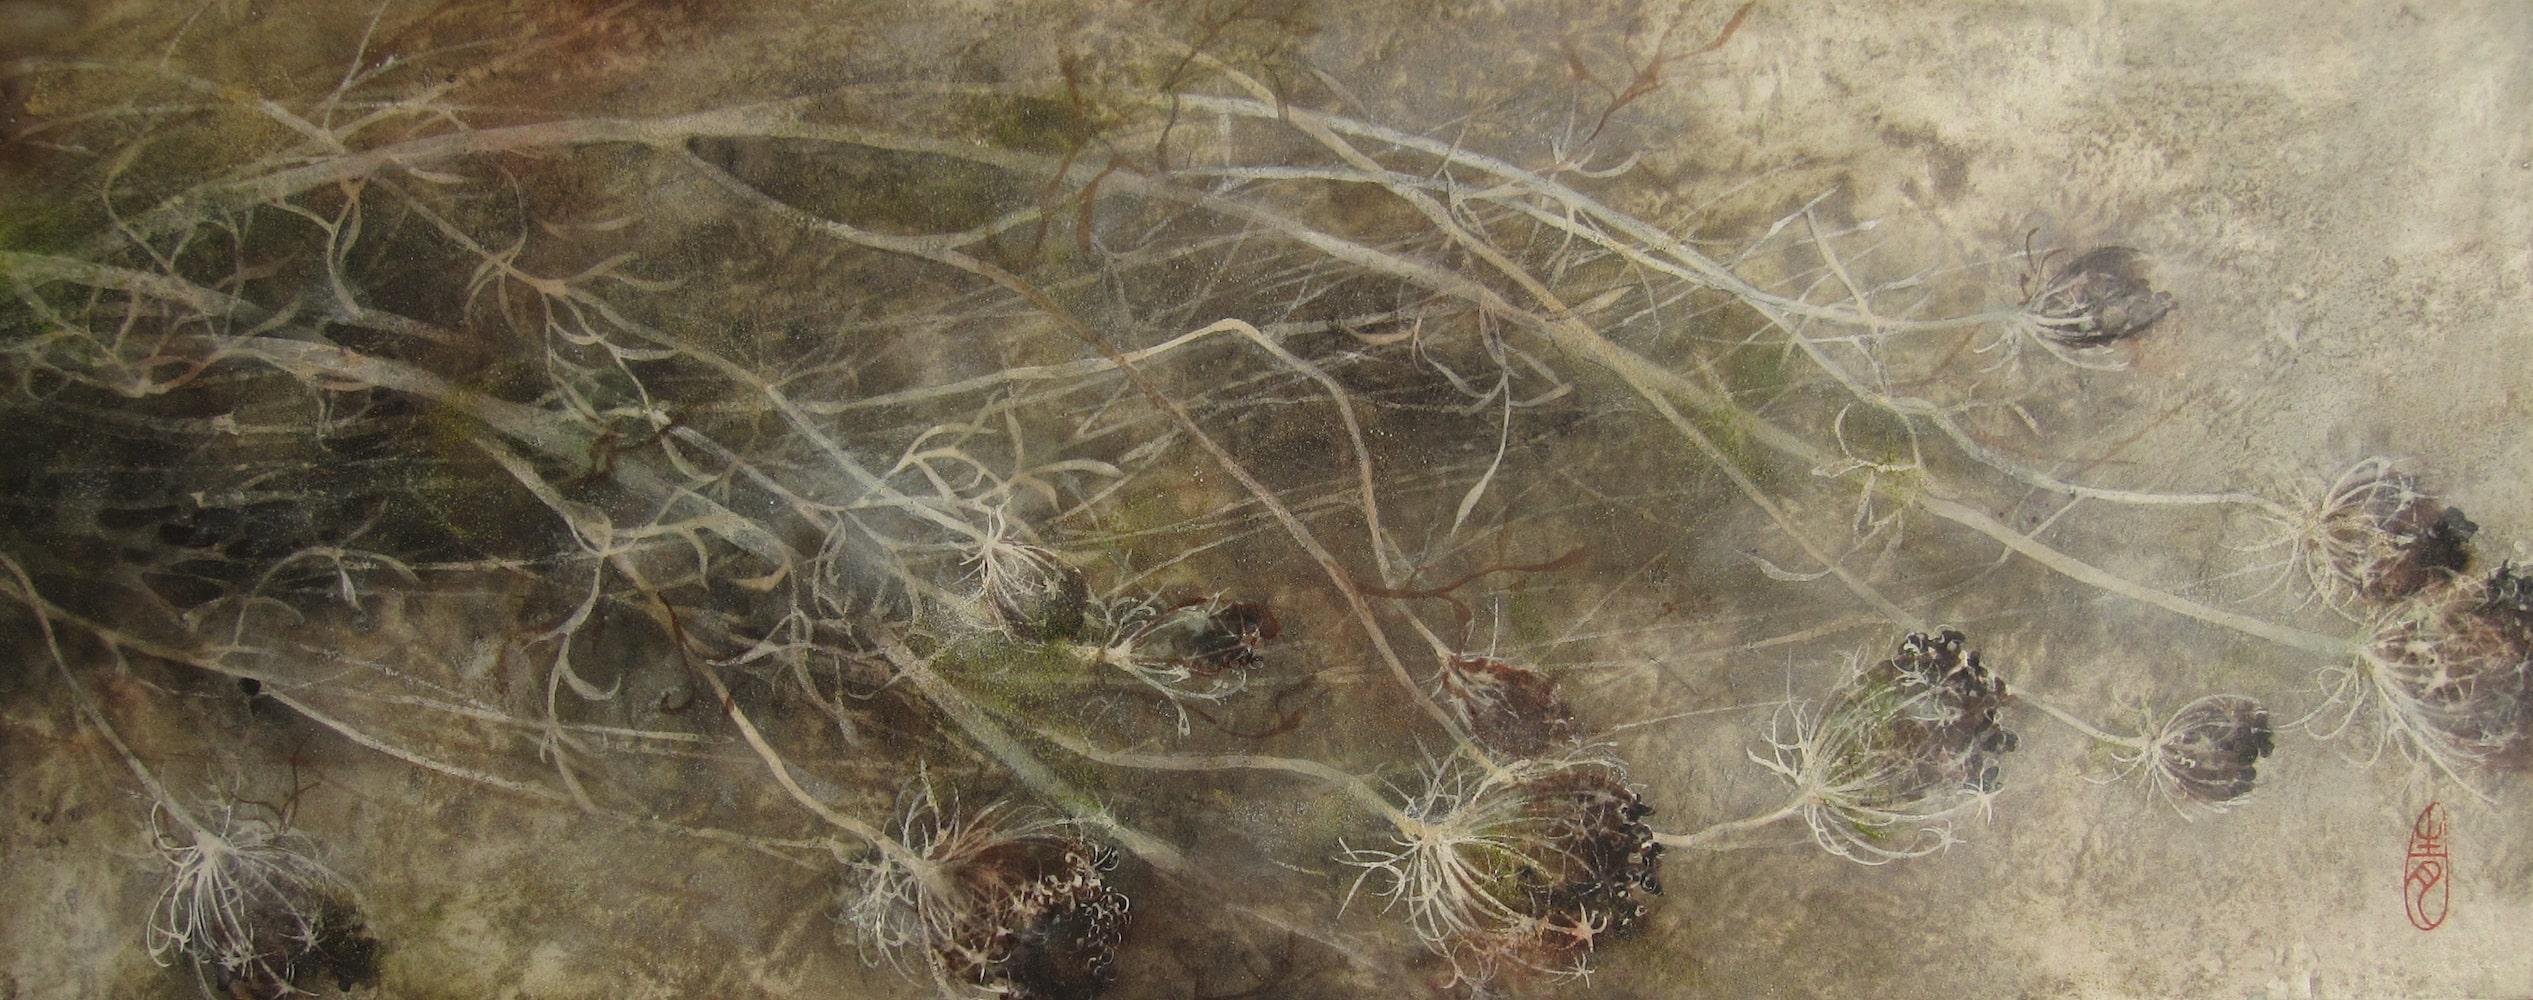 Umbel by Chen Yiching - Contemporary nihonga painting, flora, earth tones - Mixed Media Art by Yiching Chen